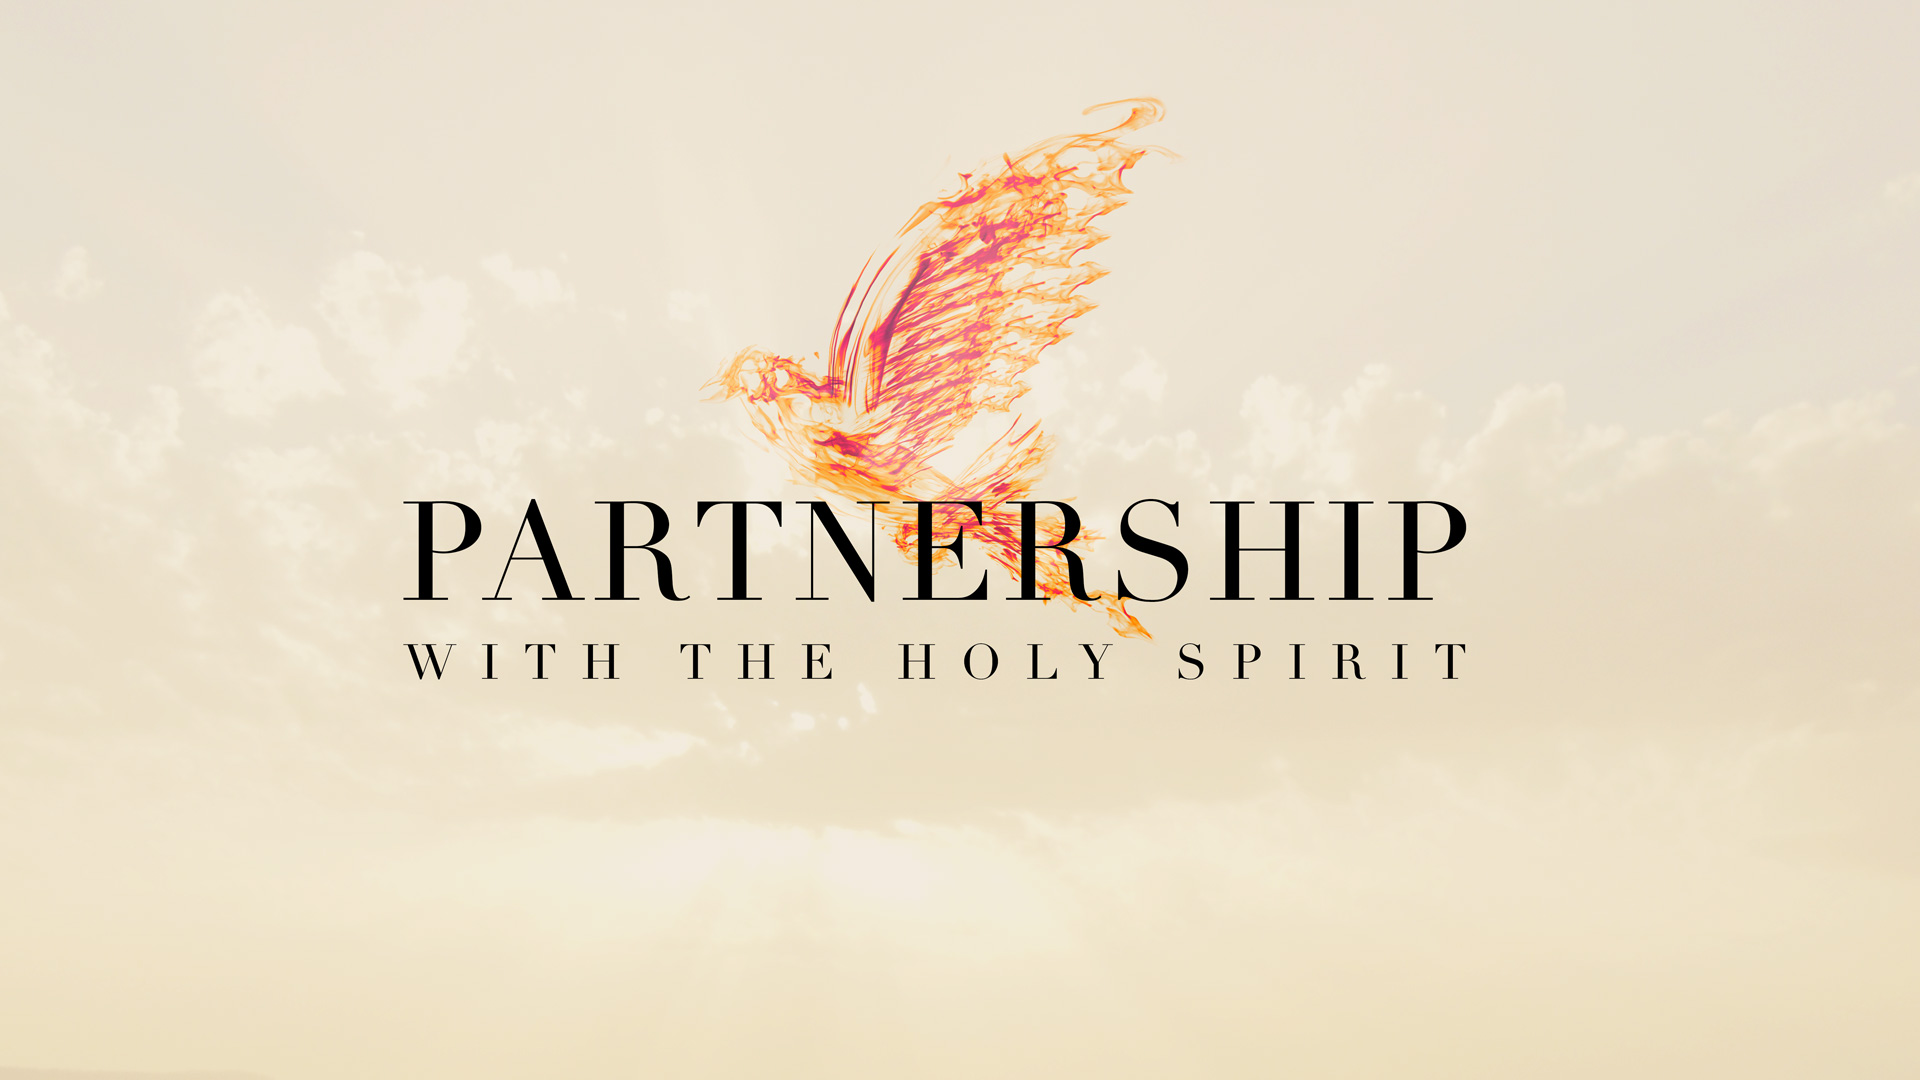 Your Partnership with the Holy Spirit